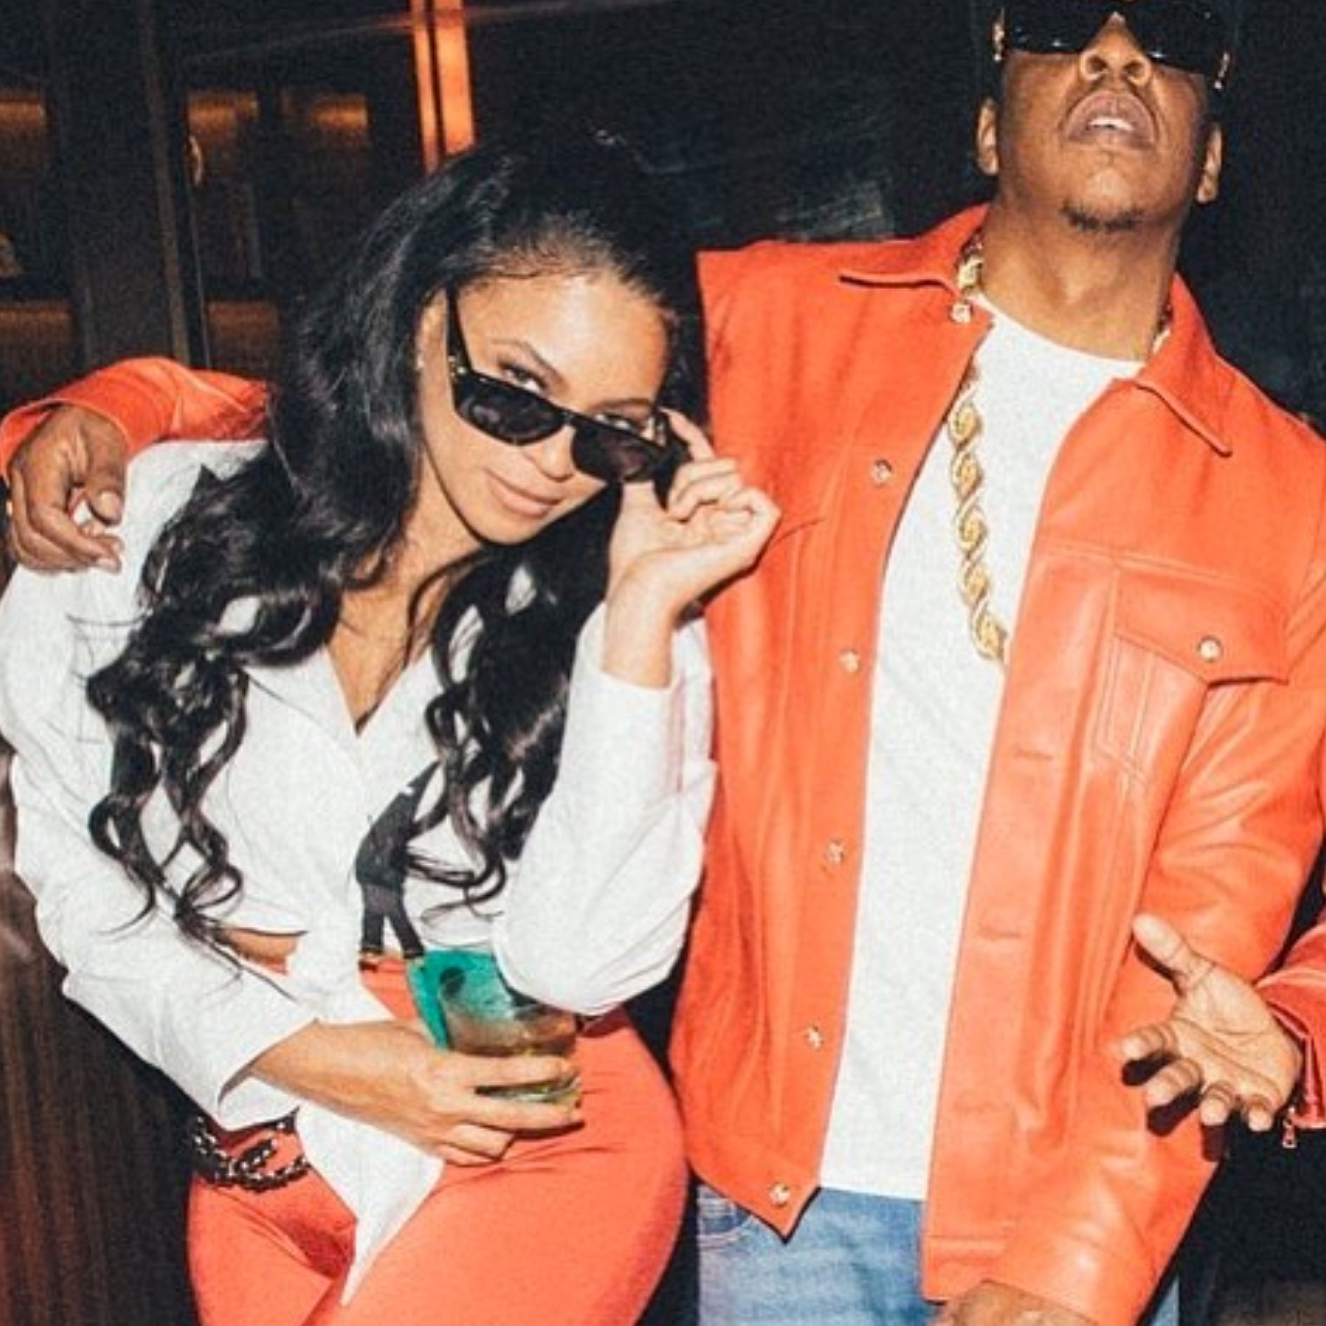 Nailed It! Beyoncé and JAY-Z Dress Up As Lil' Kim and Biggie For Halloween